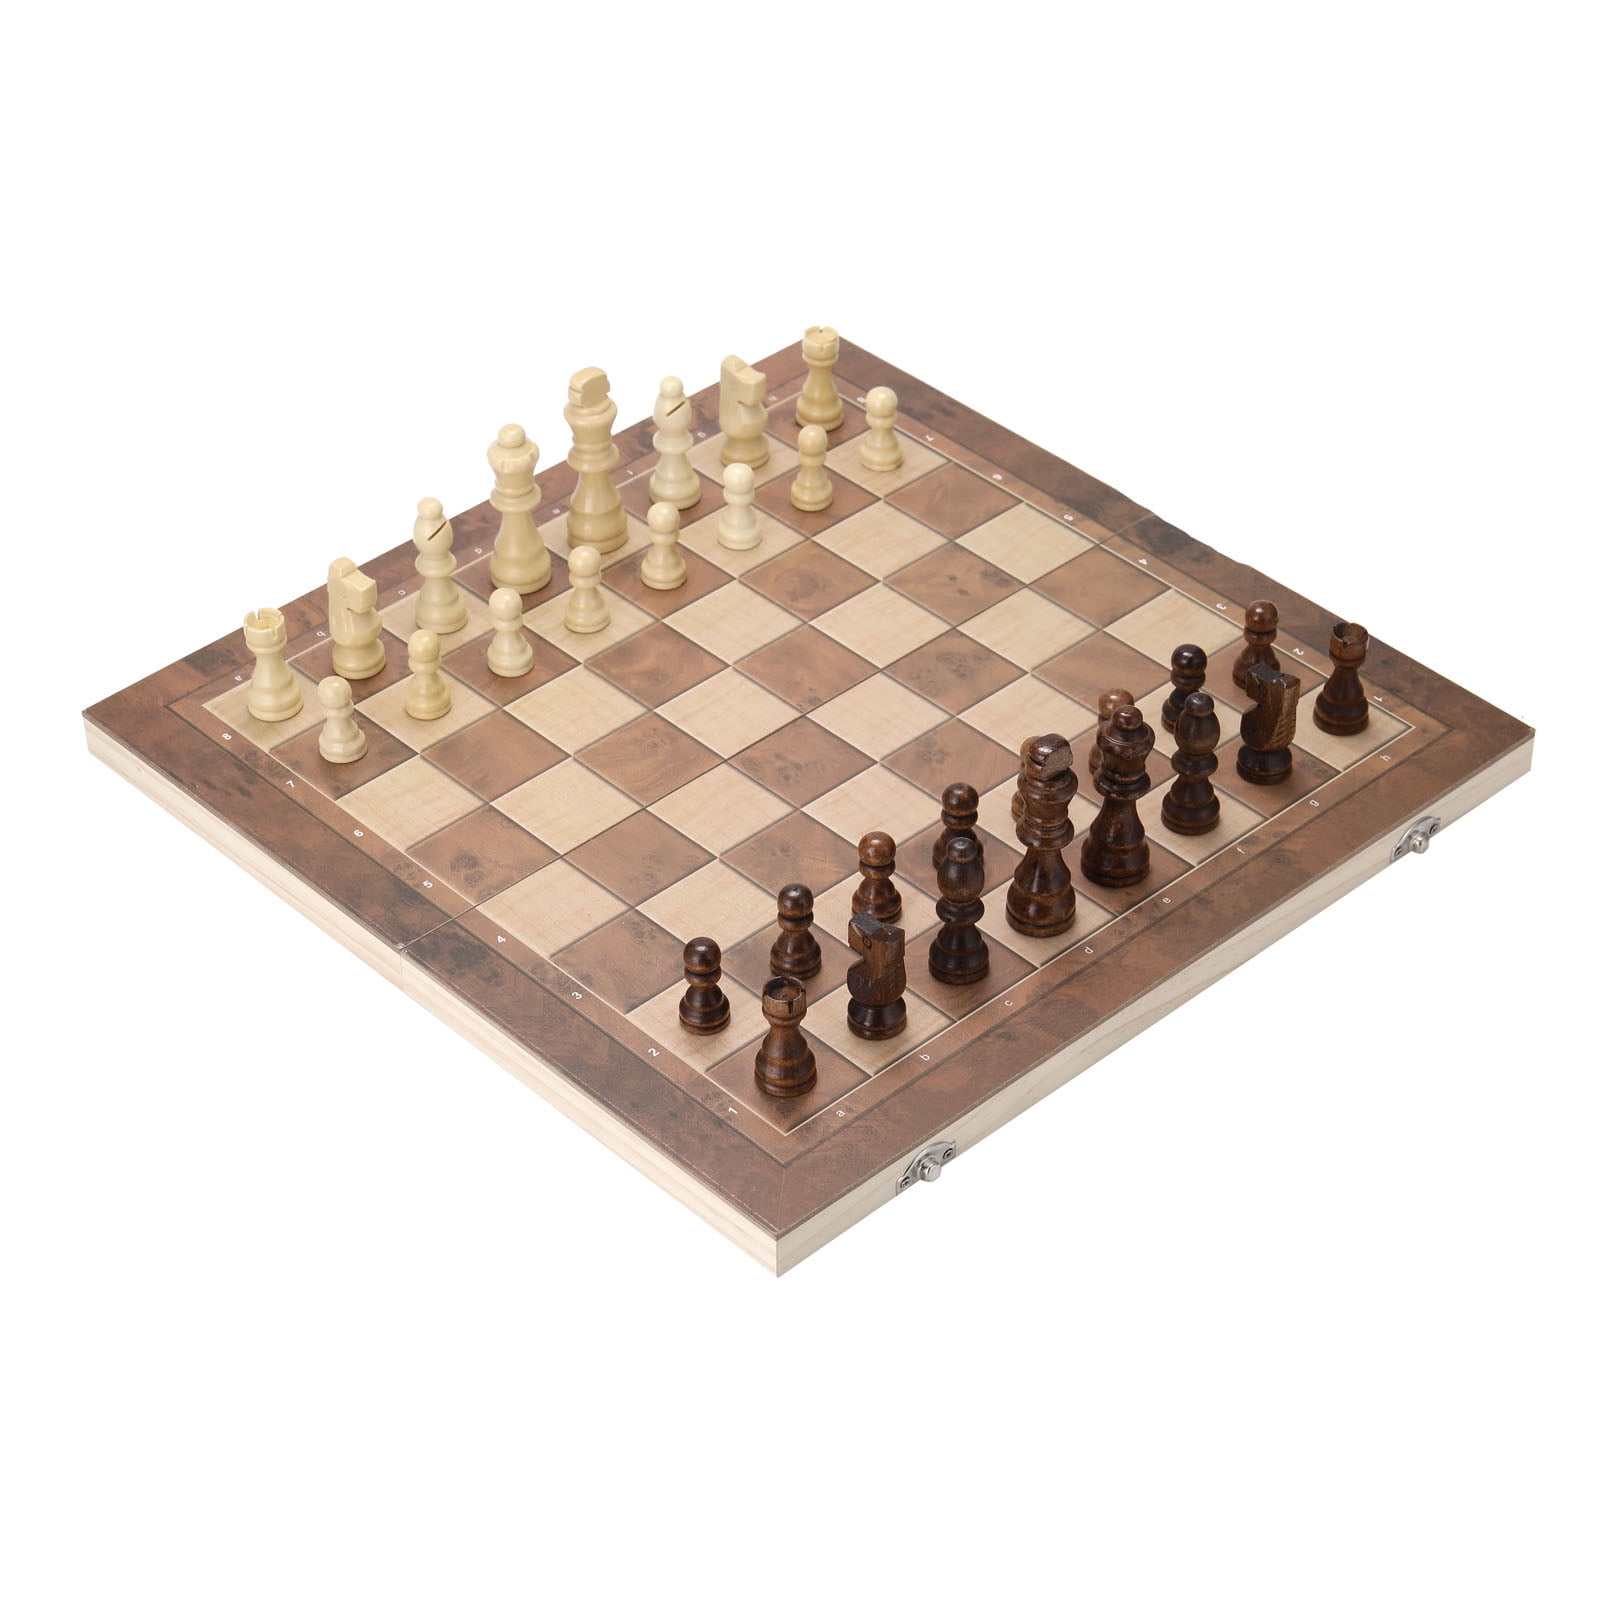 Chess Board Wooden International Chess Checkers Set Foldable Board Game 